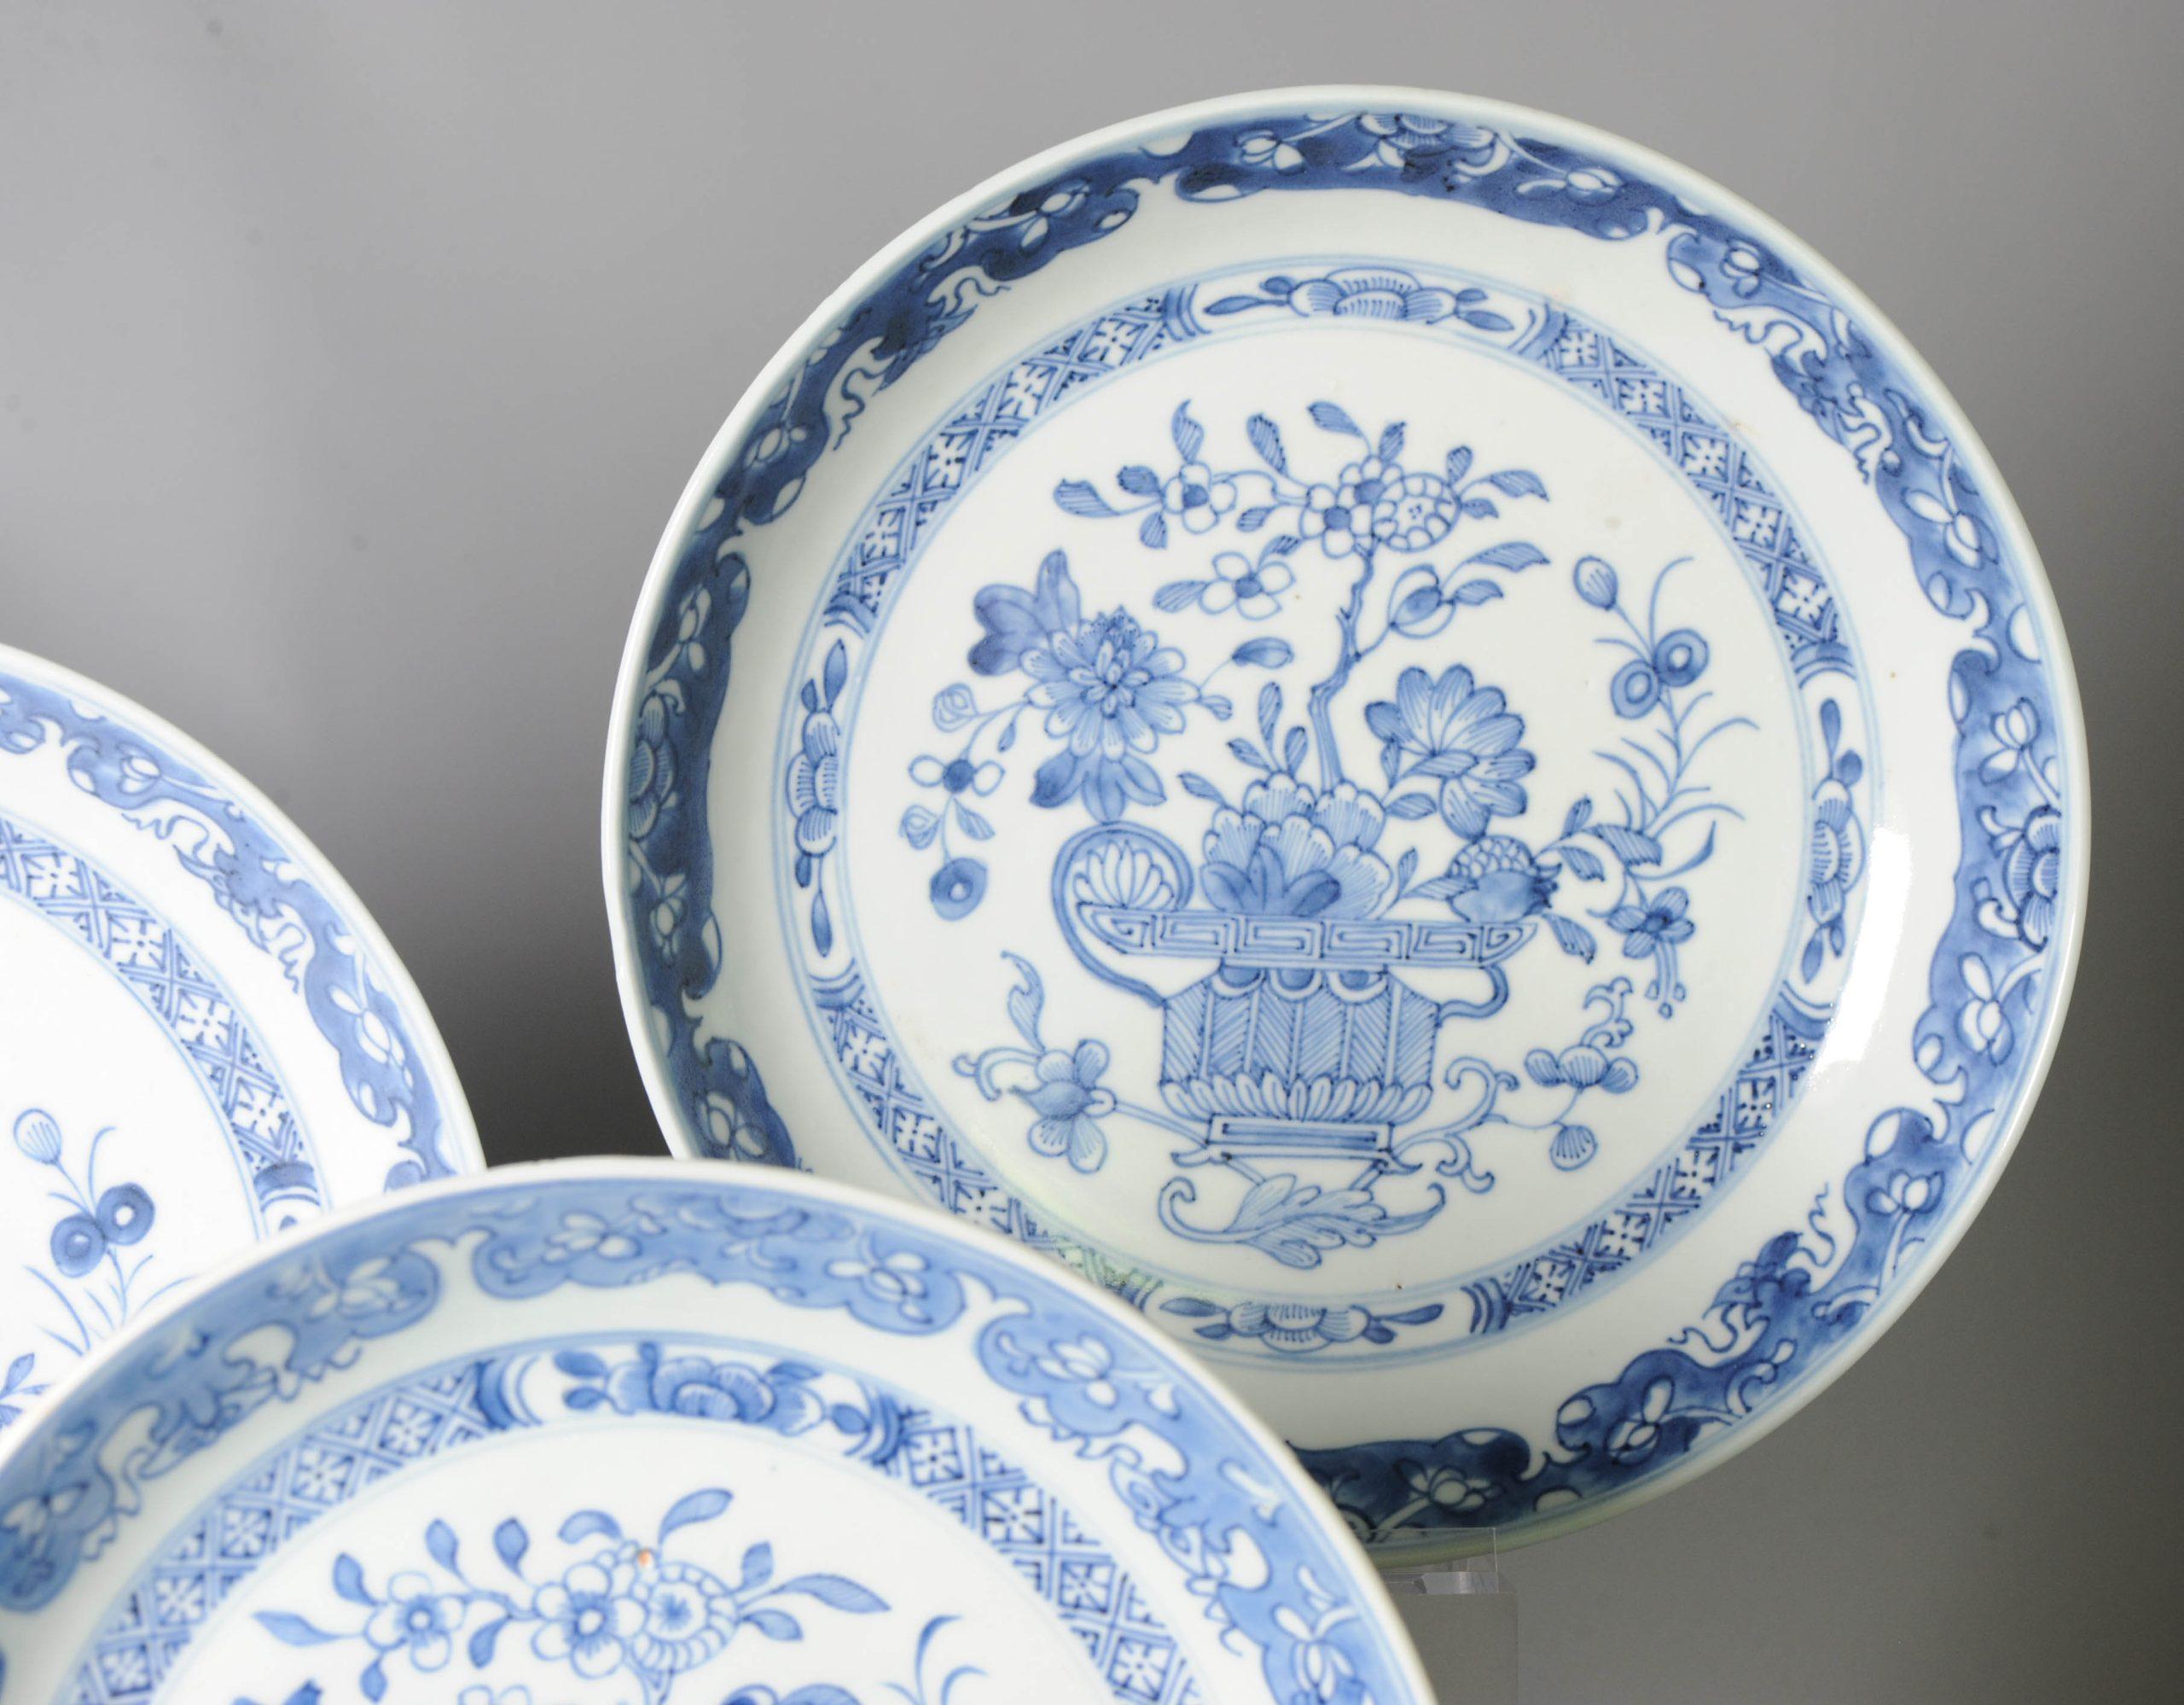 Qing Set of 3 Antique Chinese Porcelain Blue & White Dinner Plates, 18th Century For Sale